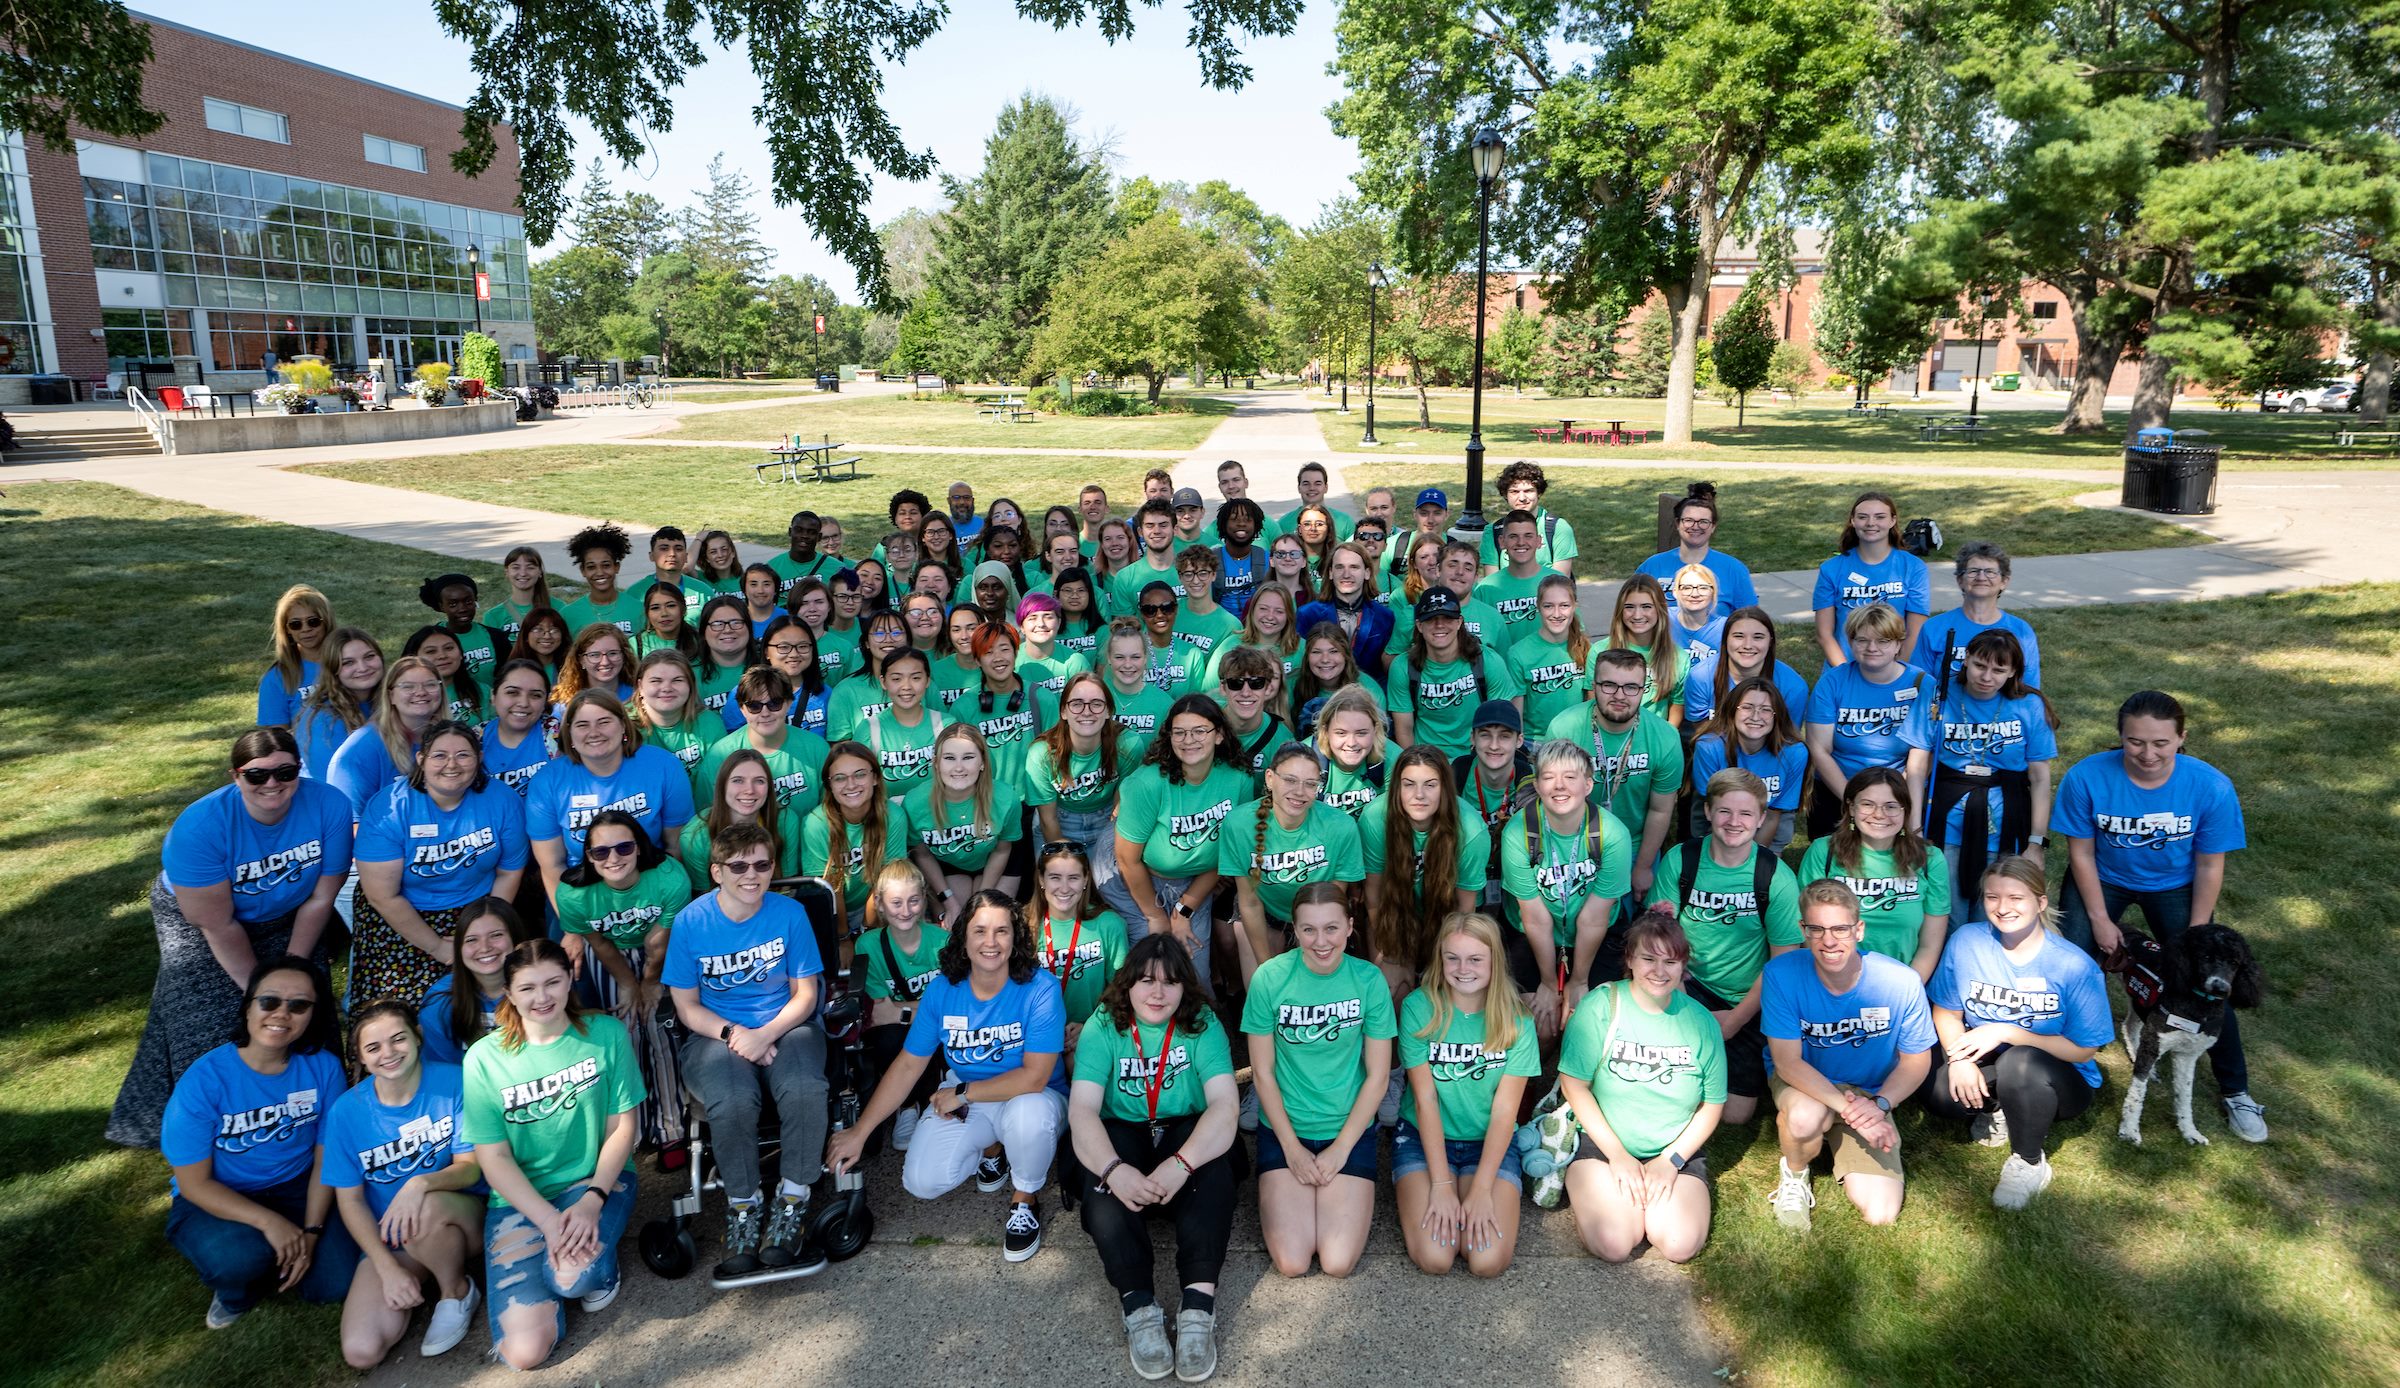 A large group of students and staff in blue and green t-shirts